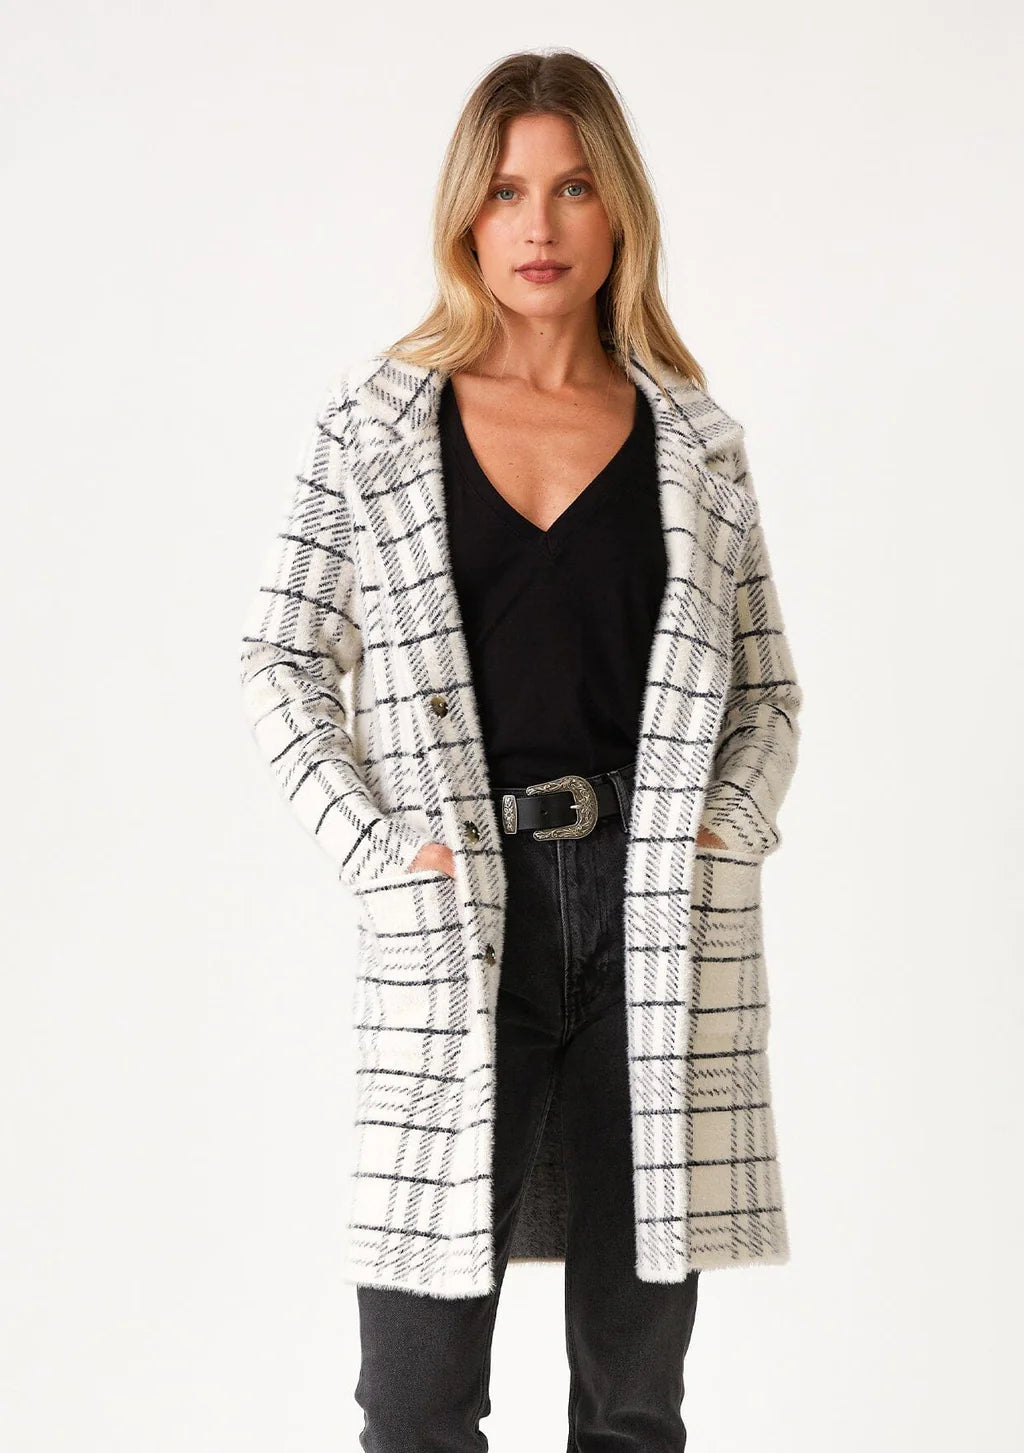 ultra-soft and fuzzy texture sweater coat with side pockets, a classic notched lapel, and a snap button front